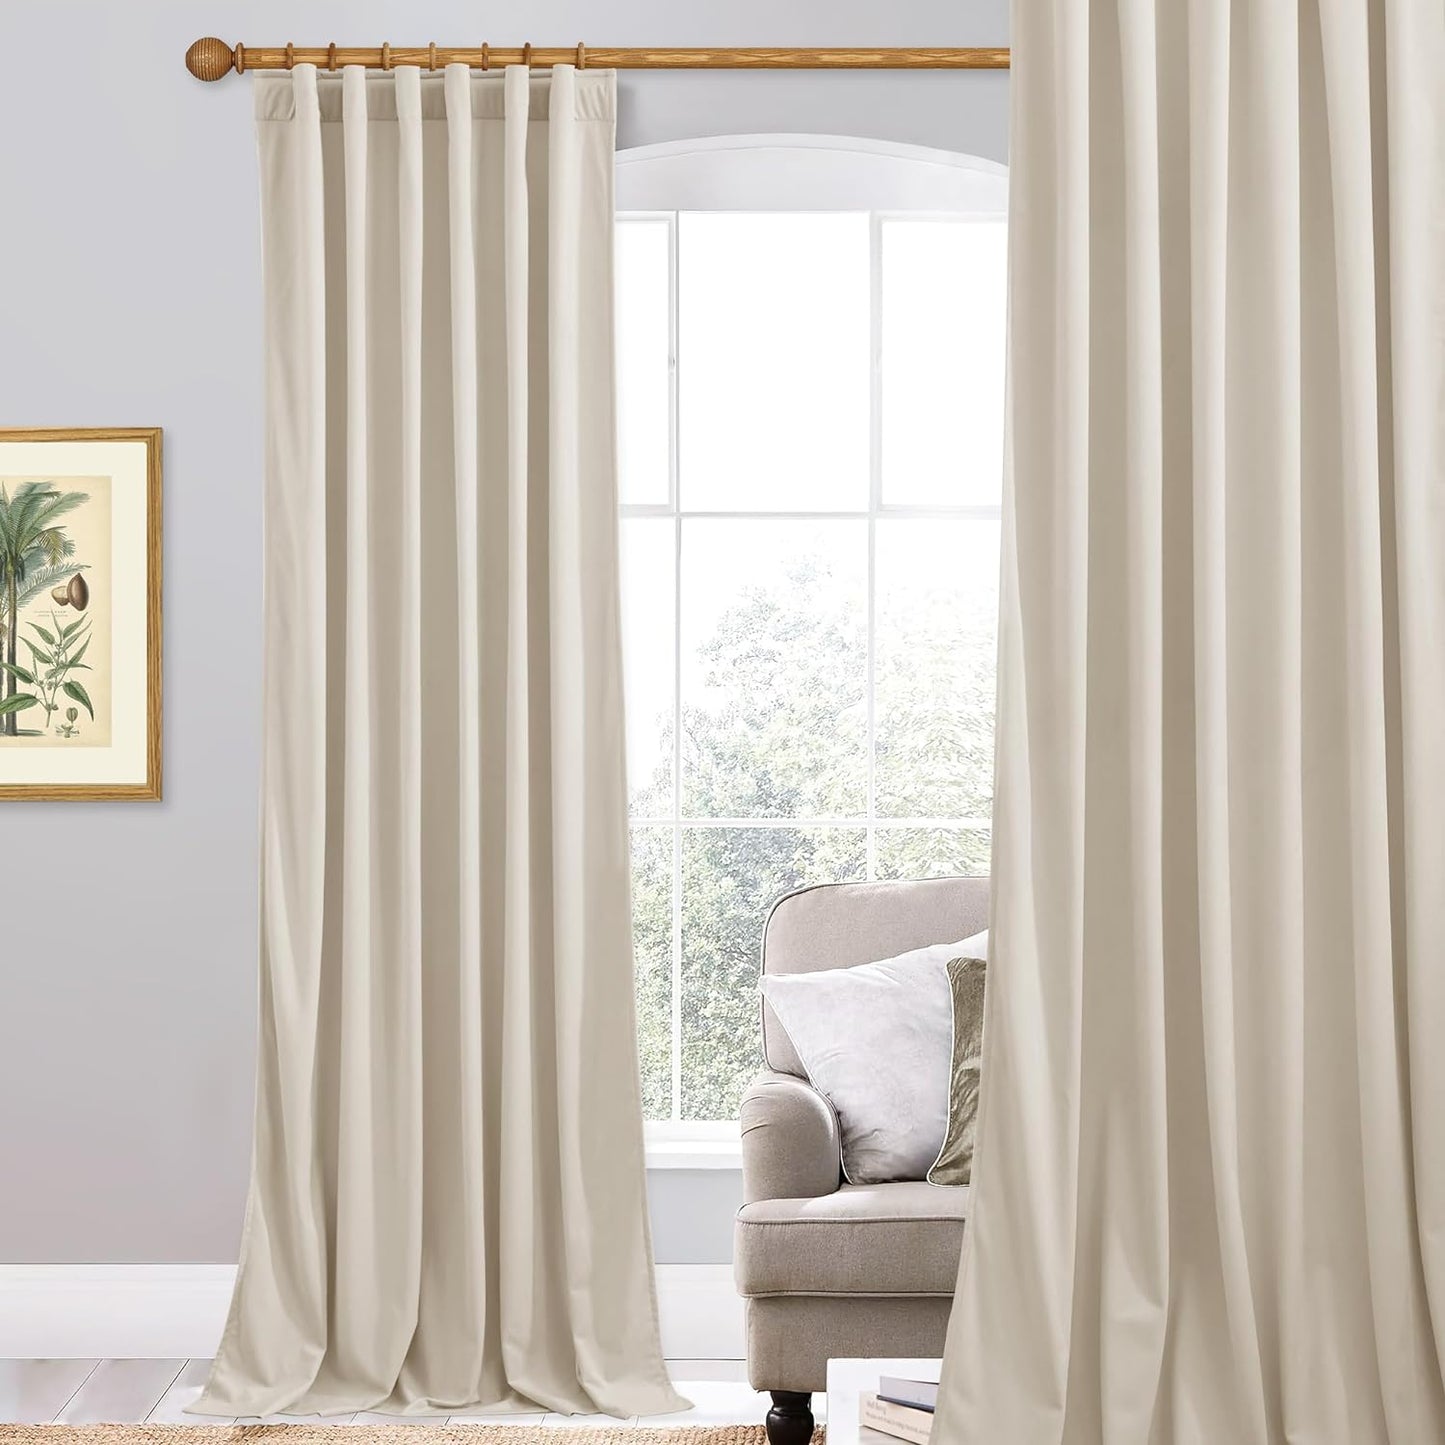 Stangh Navy Blue Velvet Curtains 96 Inches Long for Living Room, Luxury Blackout Sliding Door Curtains Thermal Insulated Window Drapes for Bedroom, W52 X L96 Inches, 1 Panel  StangH Beige W52 X L84 